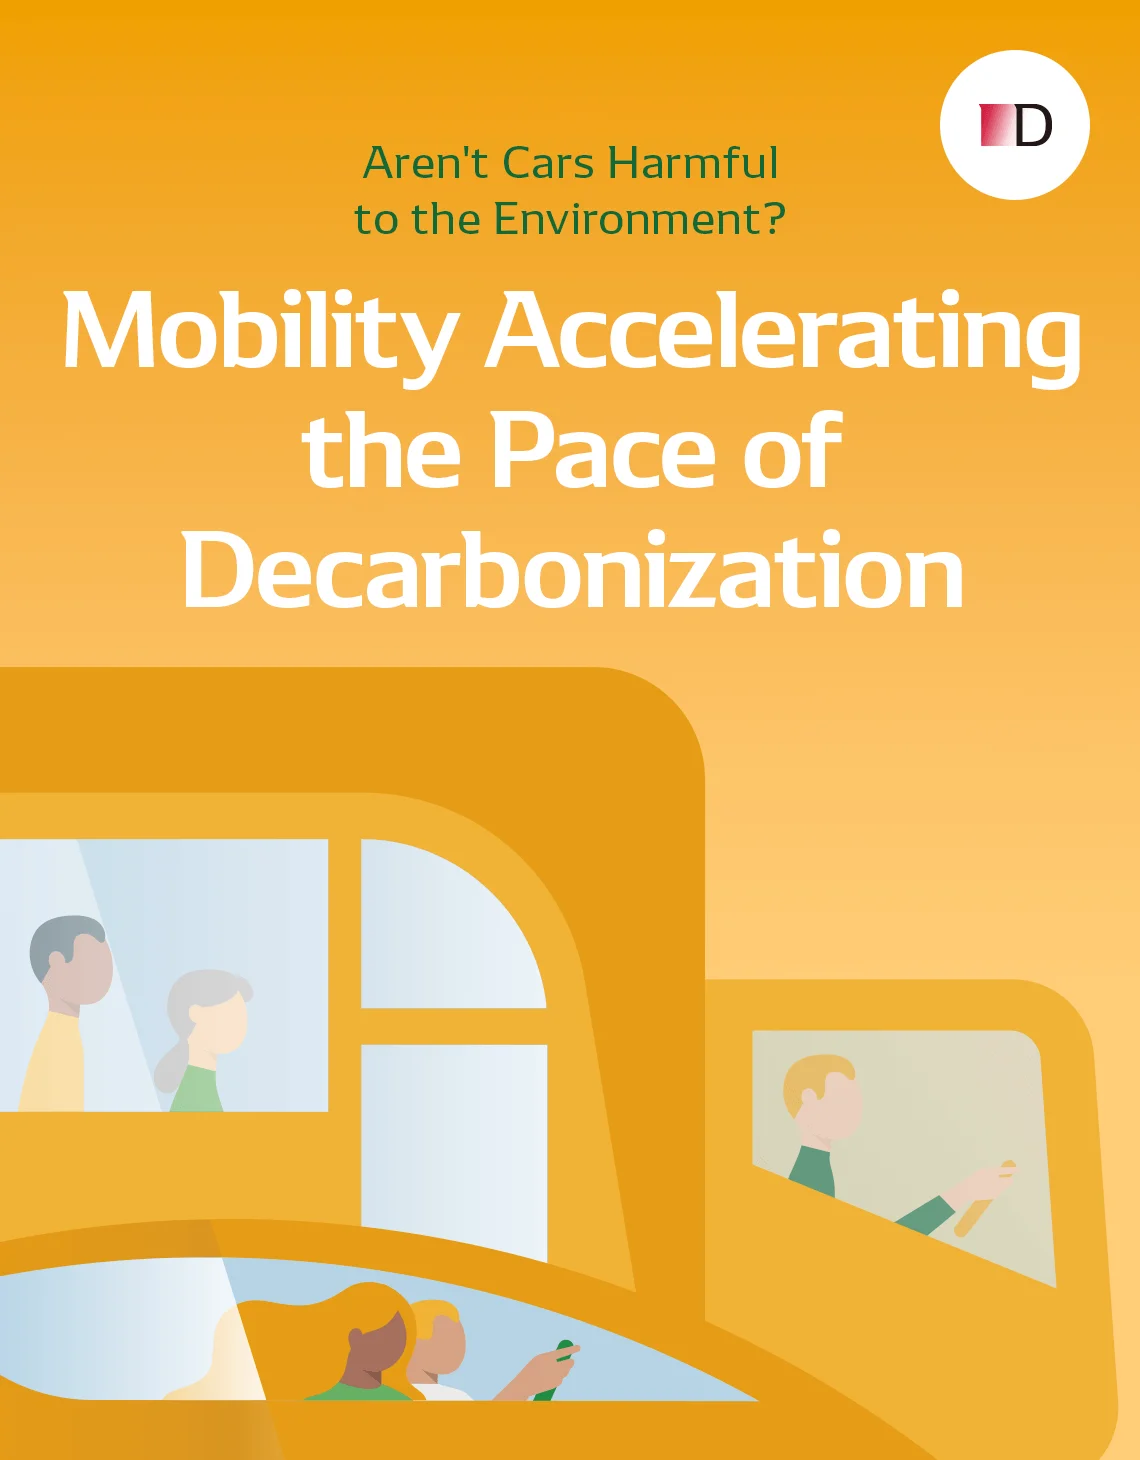 Aren't Cars Harmful to the Environment? Mobility Accelerating the Pace of Decarbonization